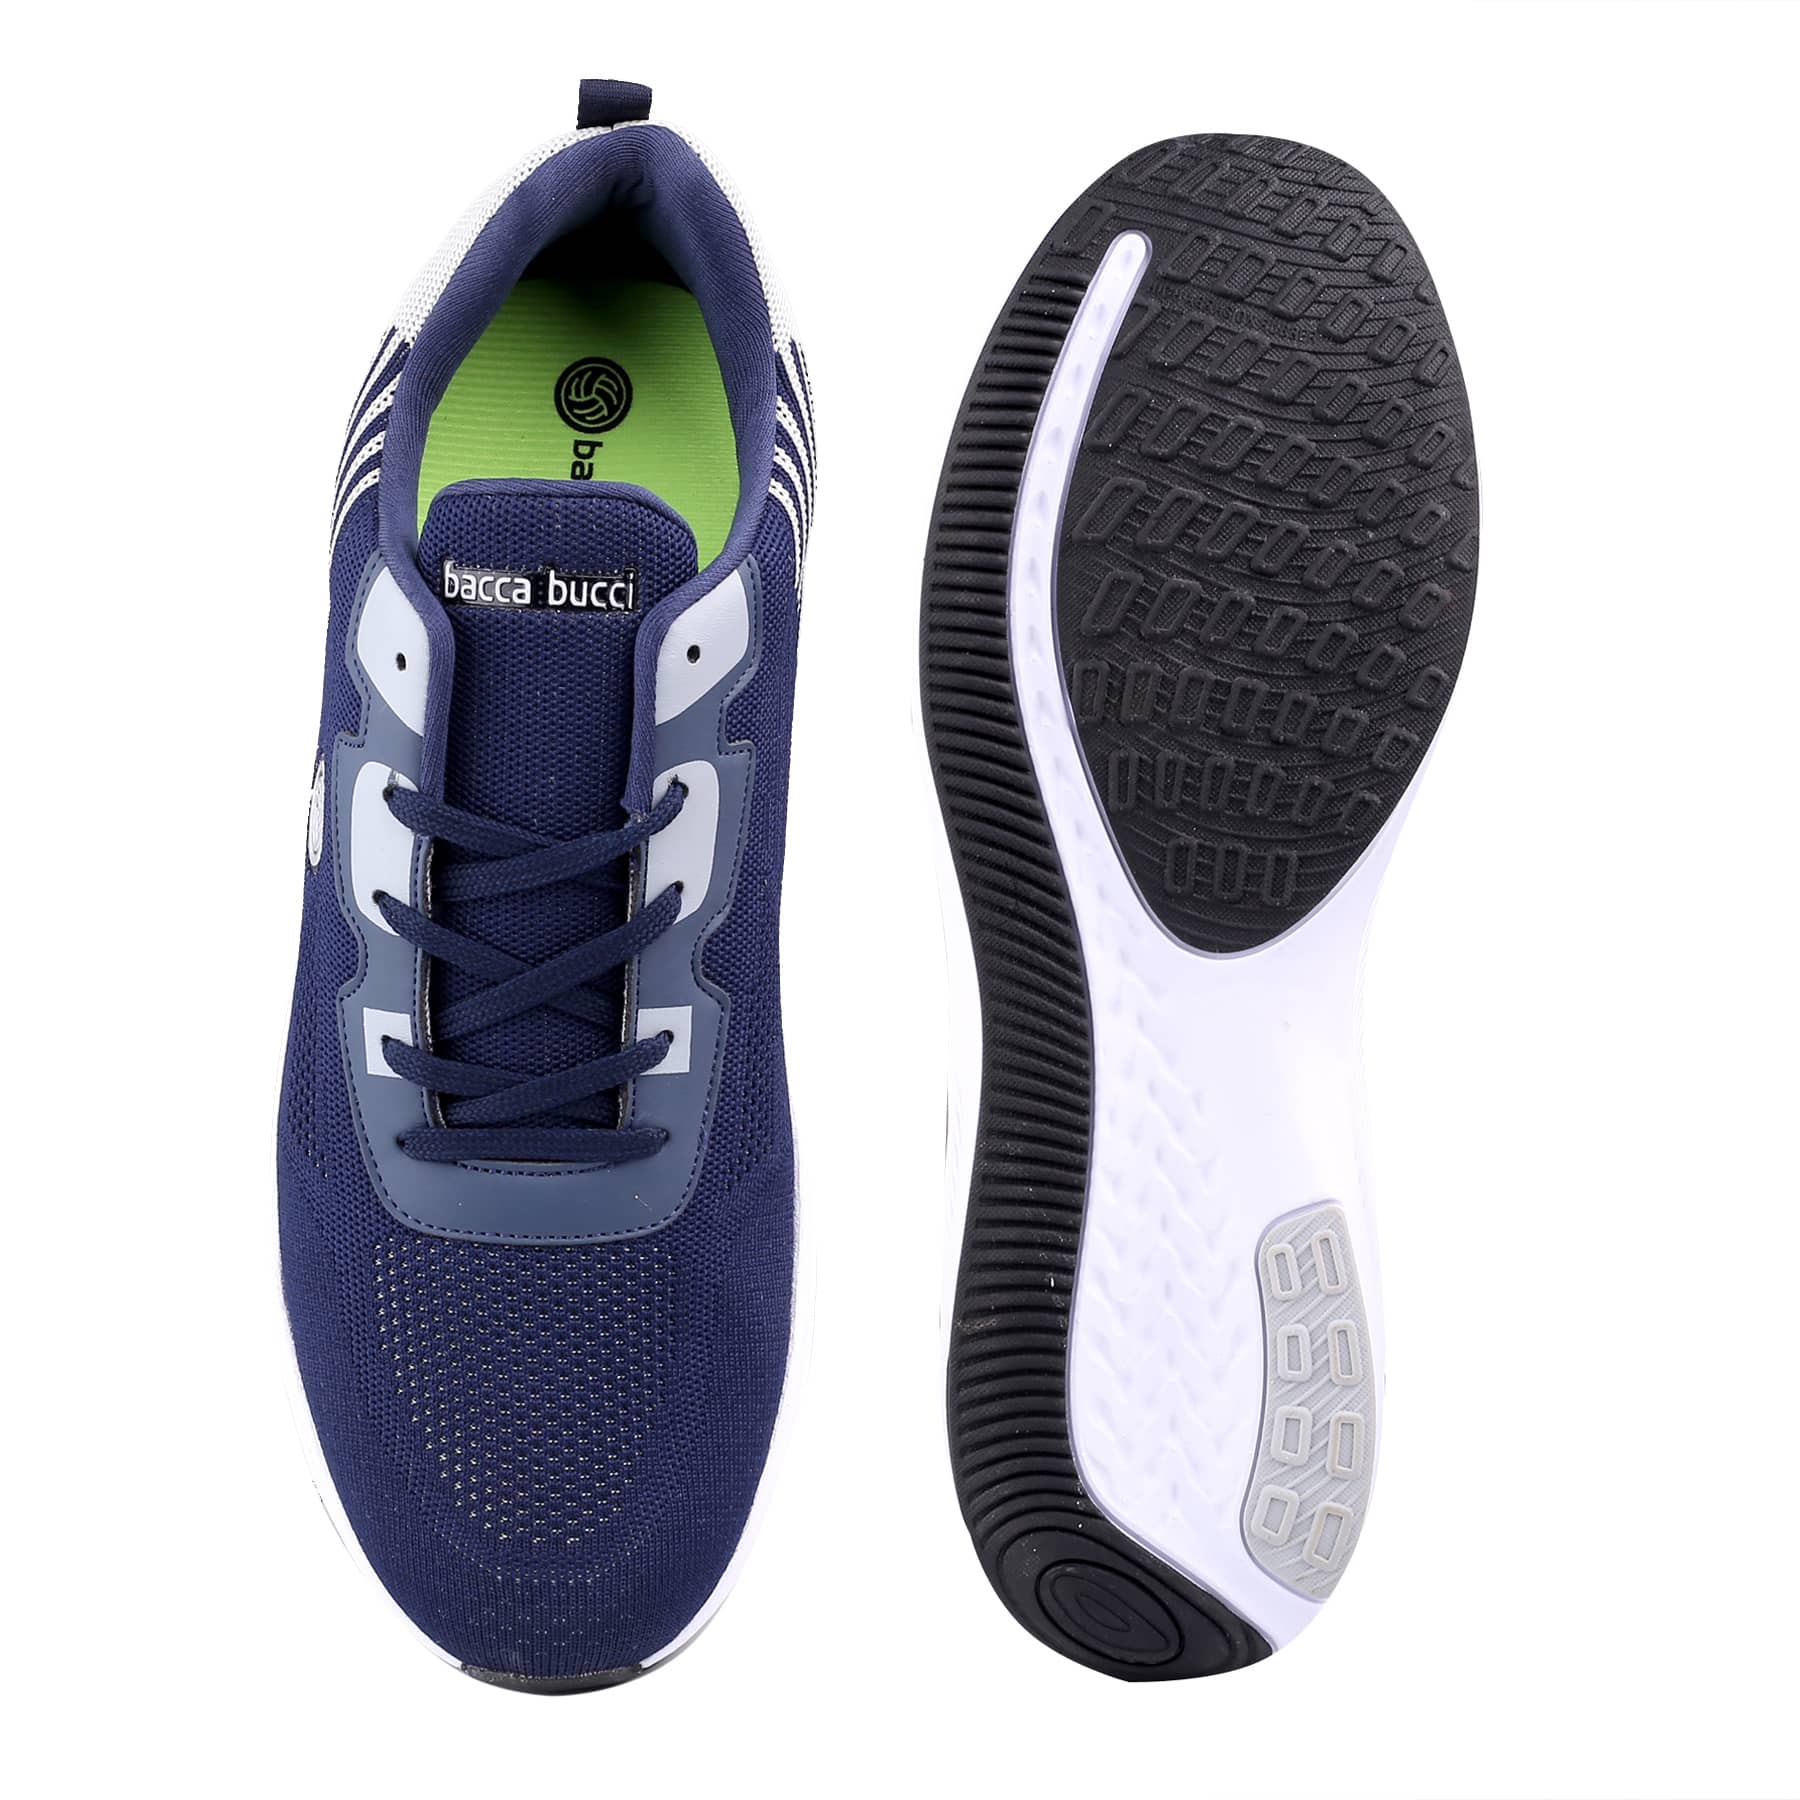 Bacca Bucci PROJECT PLUS Running Walking Training Shoe Specially developed for wide and Large Foots | Only Big Sizes Available | UK-11 to 15